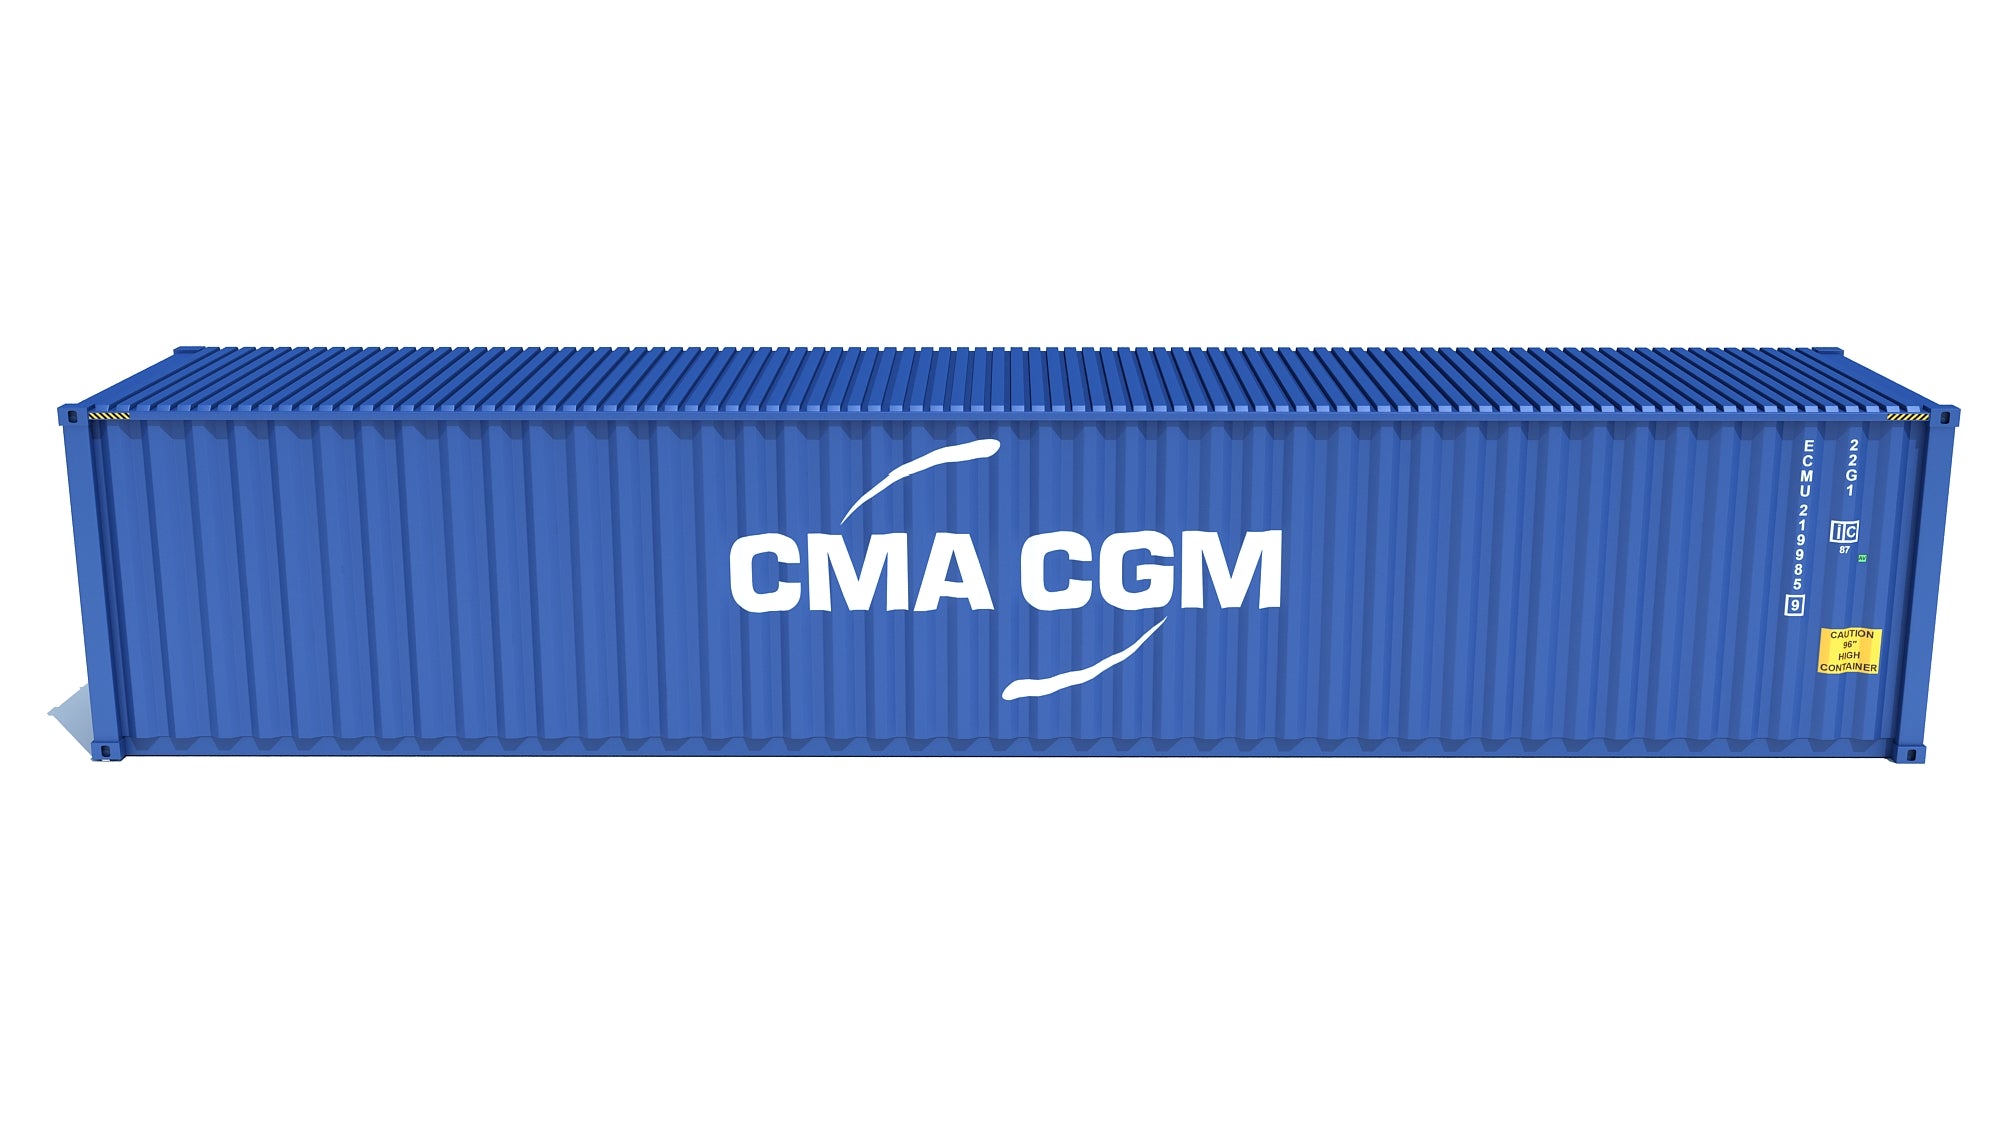 Shipping Container CMA CGM